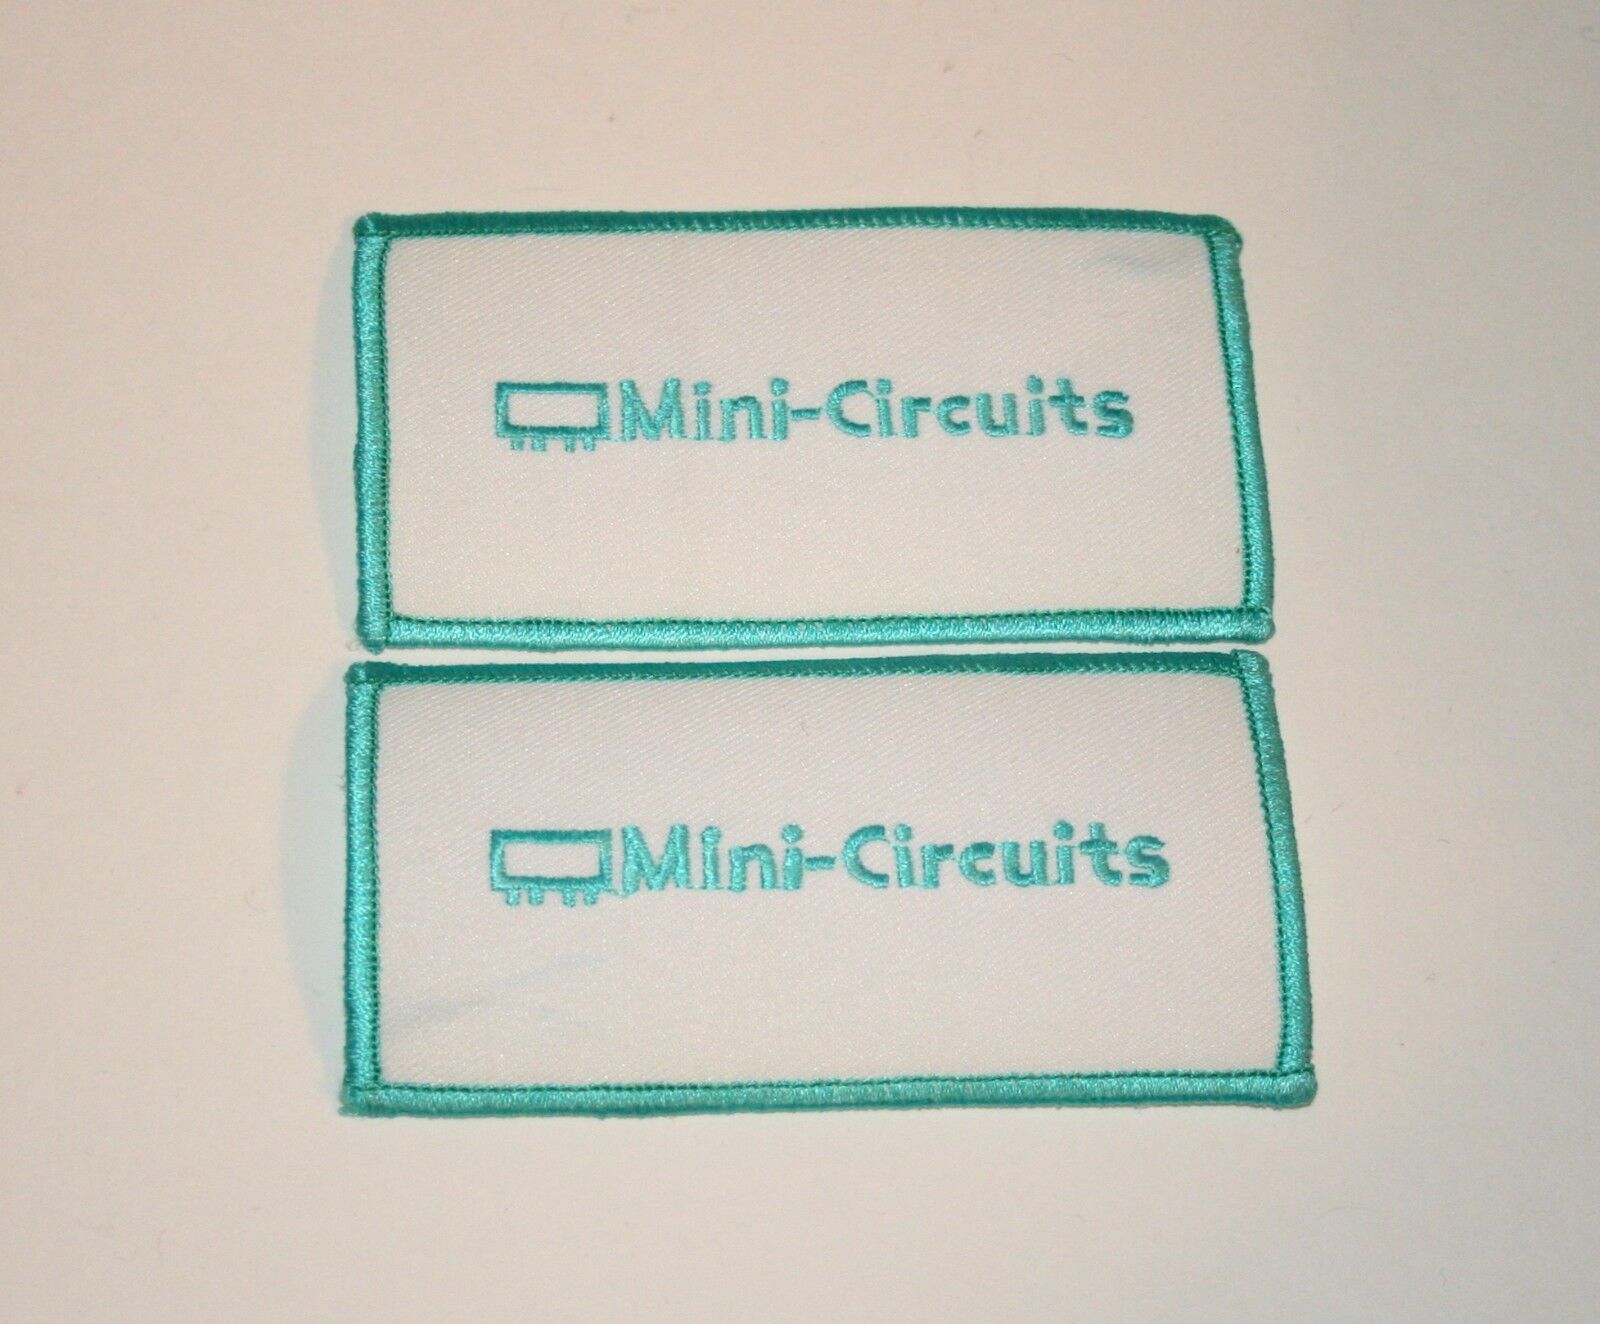 2 Vintage Mini-Circuits Patch New NOS 1970s RF Circuit Board